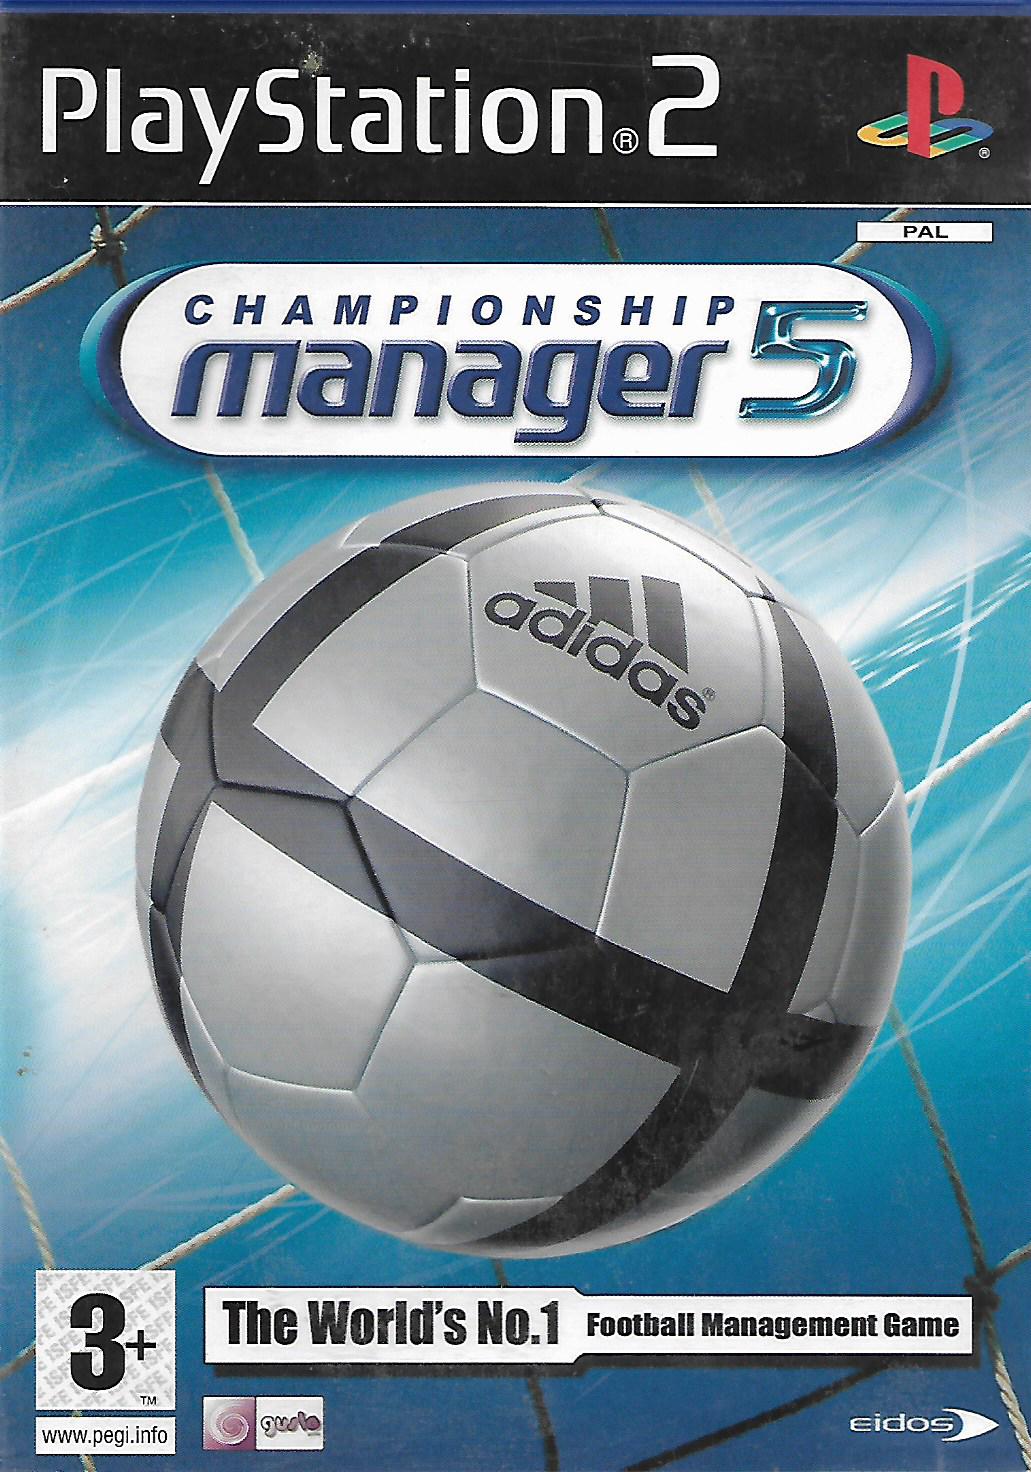 CHAPIONSHIP MANAGER 5 (PS2 - bazar)